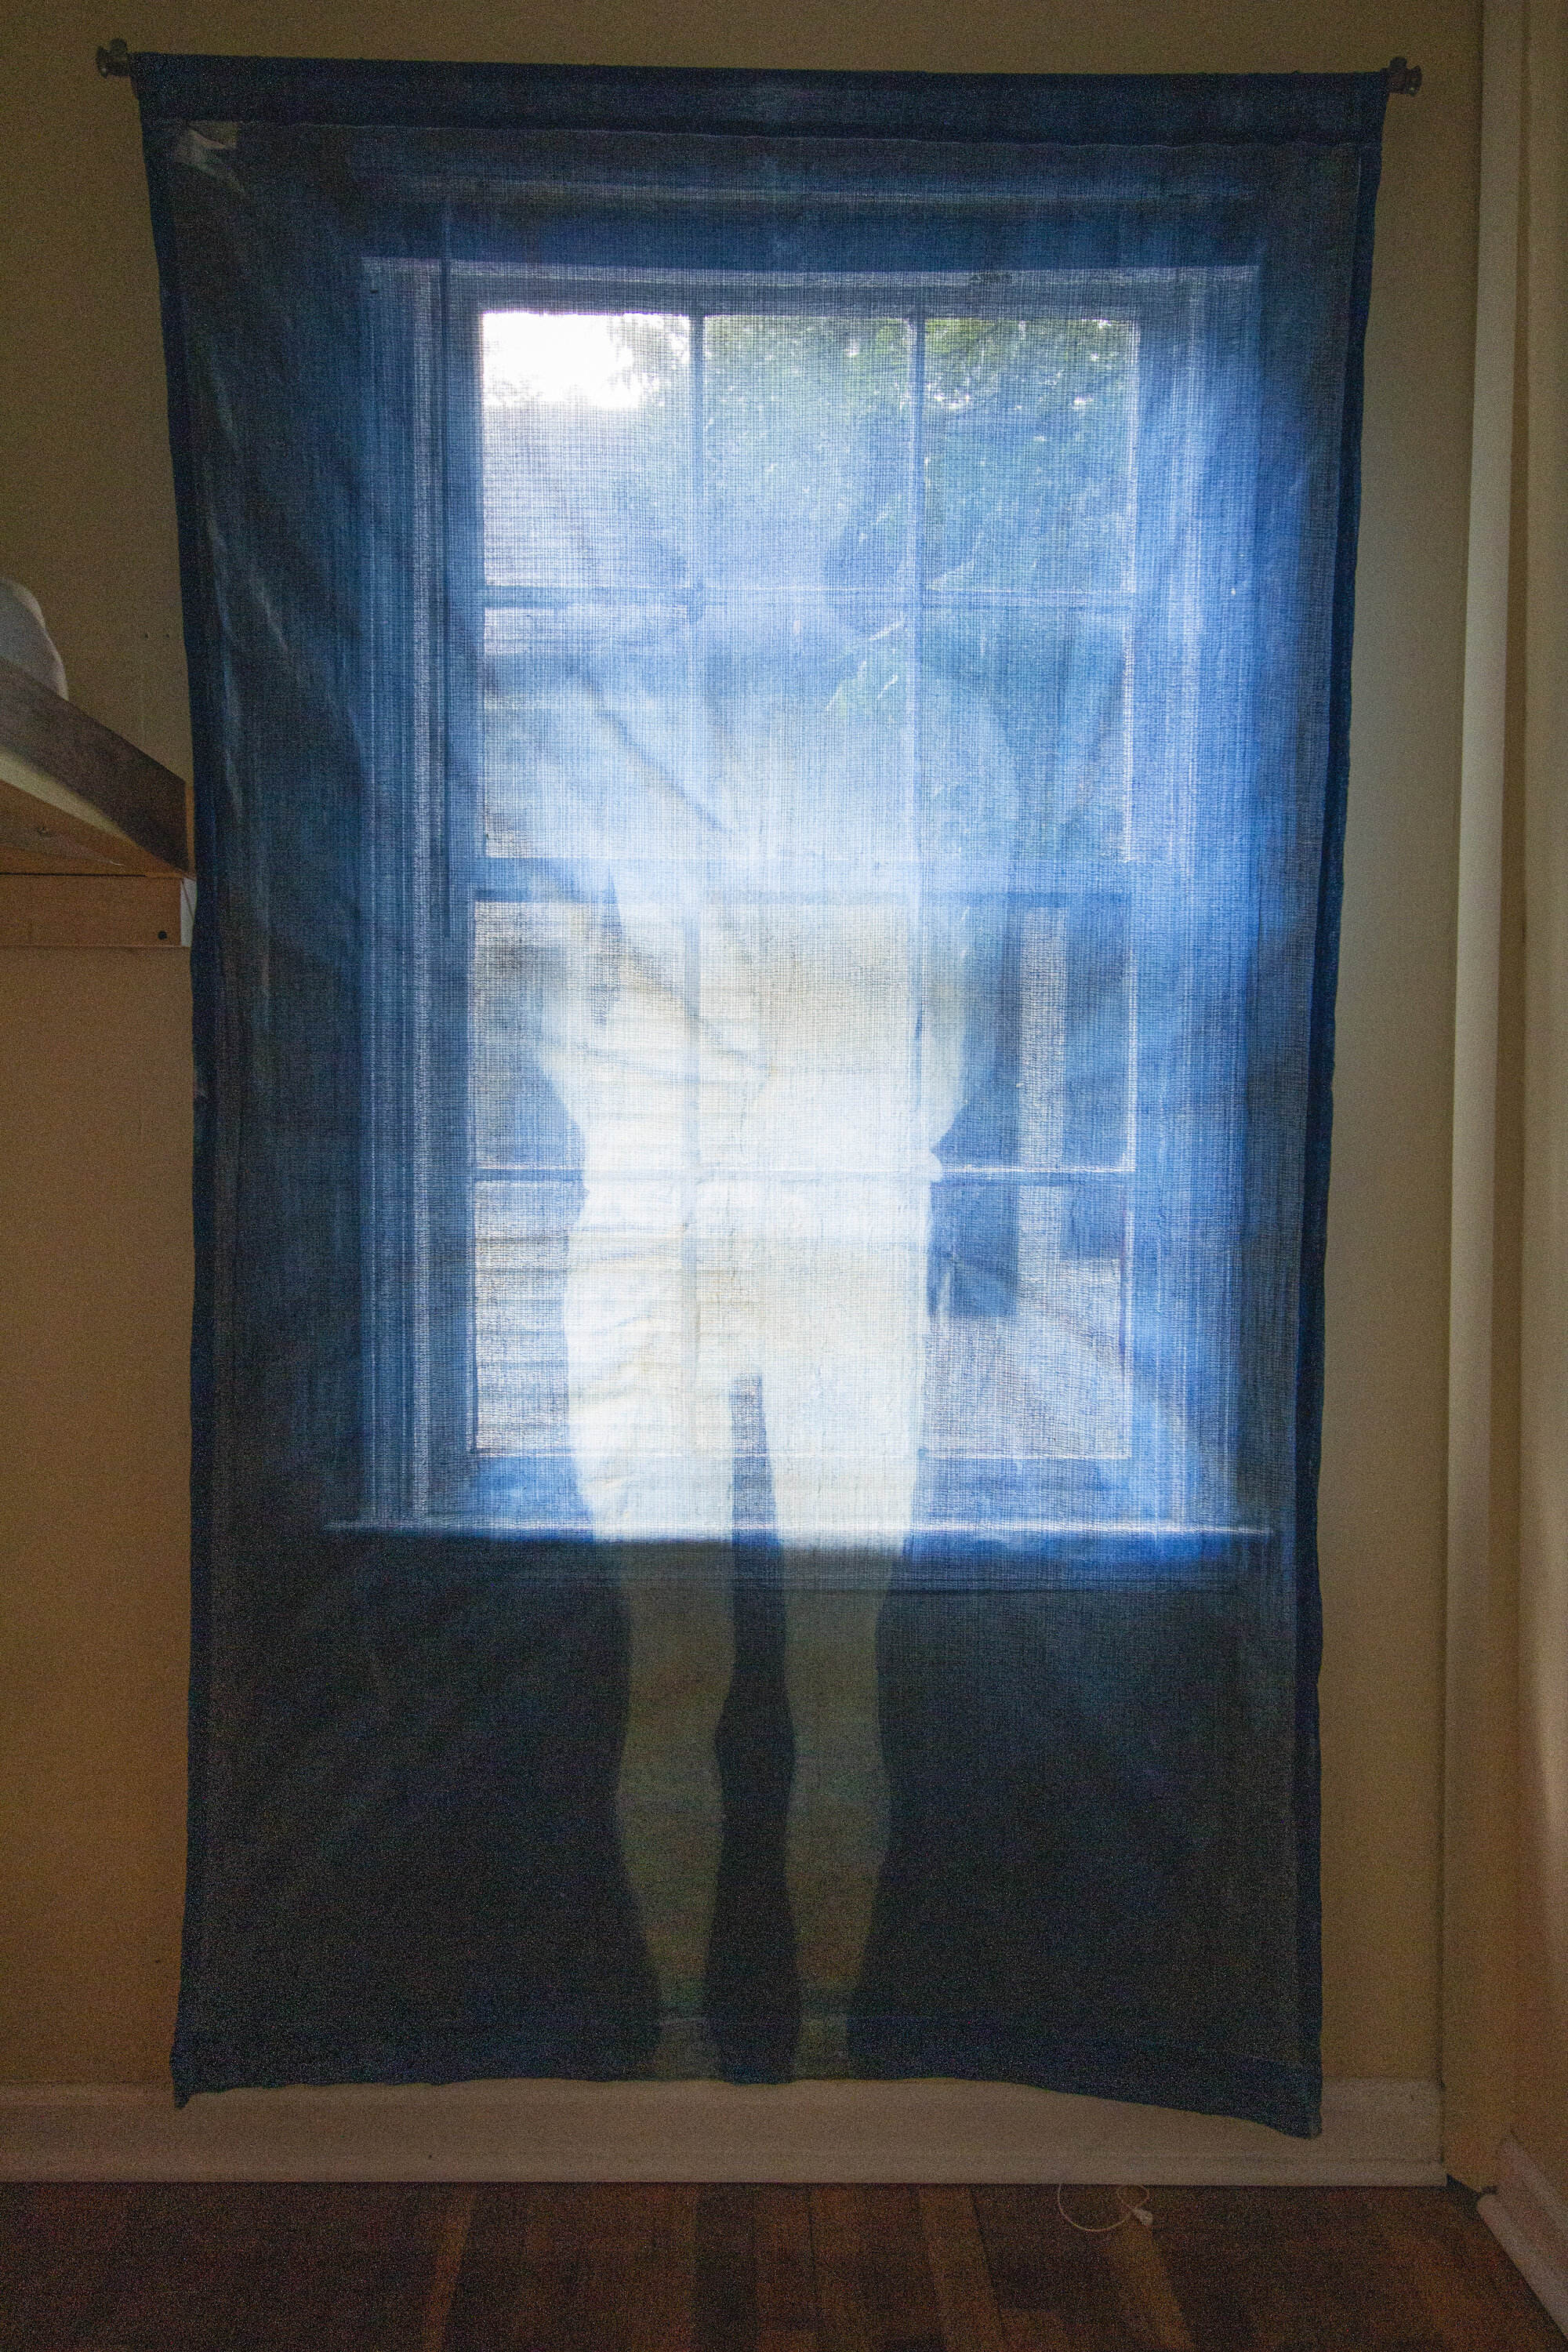 Fading [early evening], 2020, cotton curtain, cyanotype solution, curtain rod, and hardware, 55 x 84 inches.